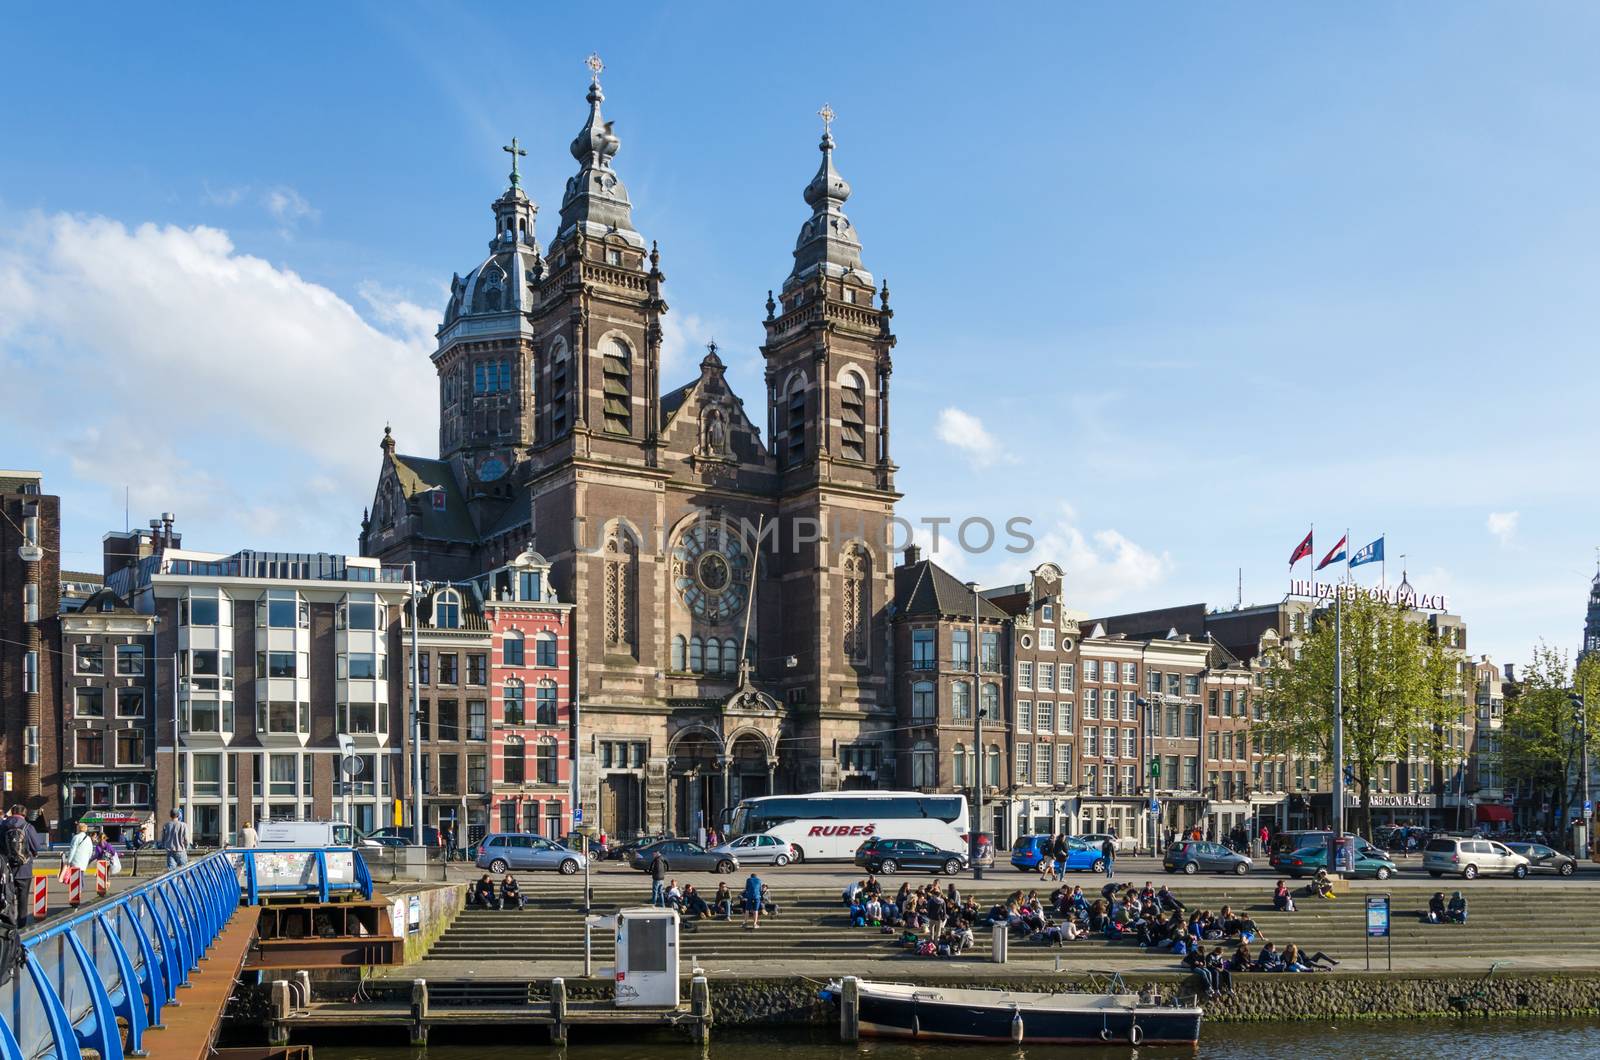 Amsterdam, Netherlands - May 8, 2015: Tourists at Church of Saint Nicholas(Basilica of Saint Nicholas) on May 8, 2015 in Amsterdam, Netherlands.The basilica has a collection of religious murals. Above the high altar is the crown of Maximilian I, which is a symbol seen throughout Amsterdam.